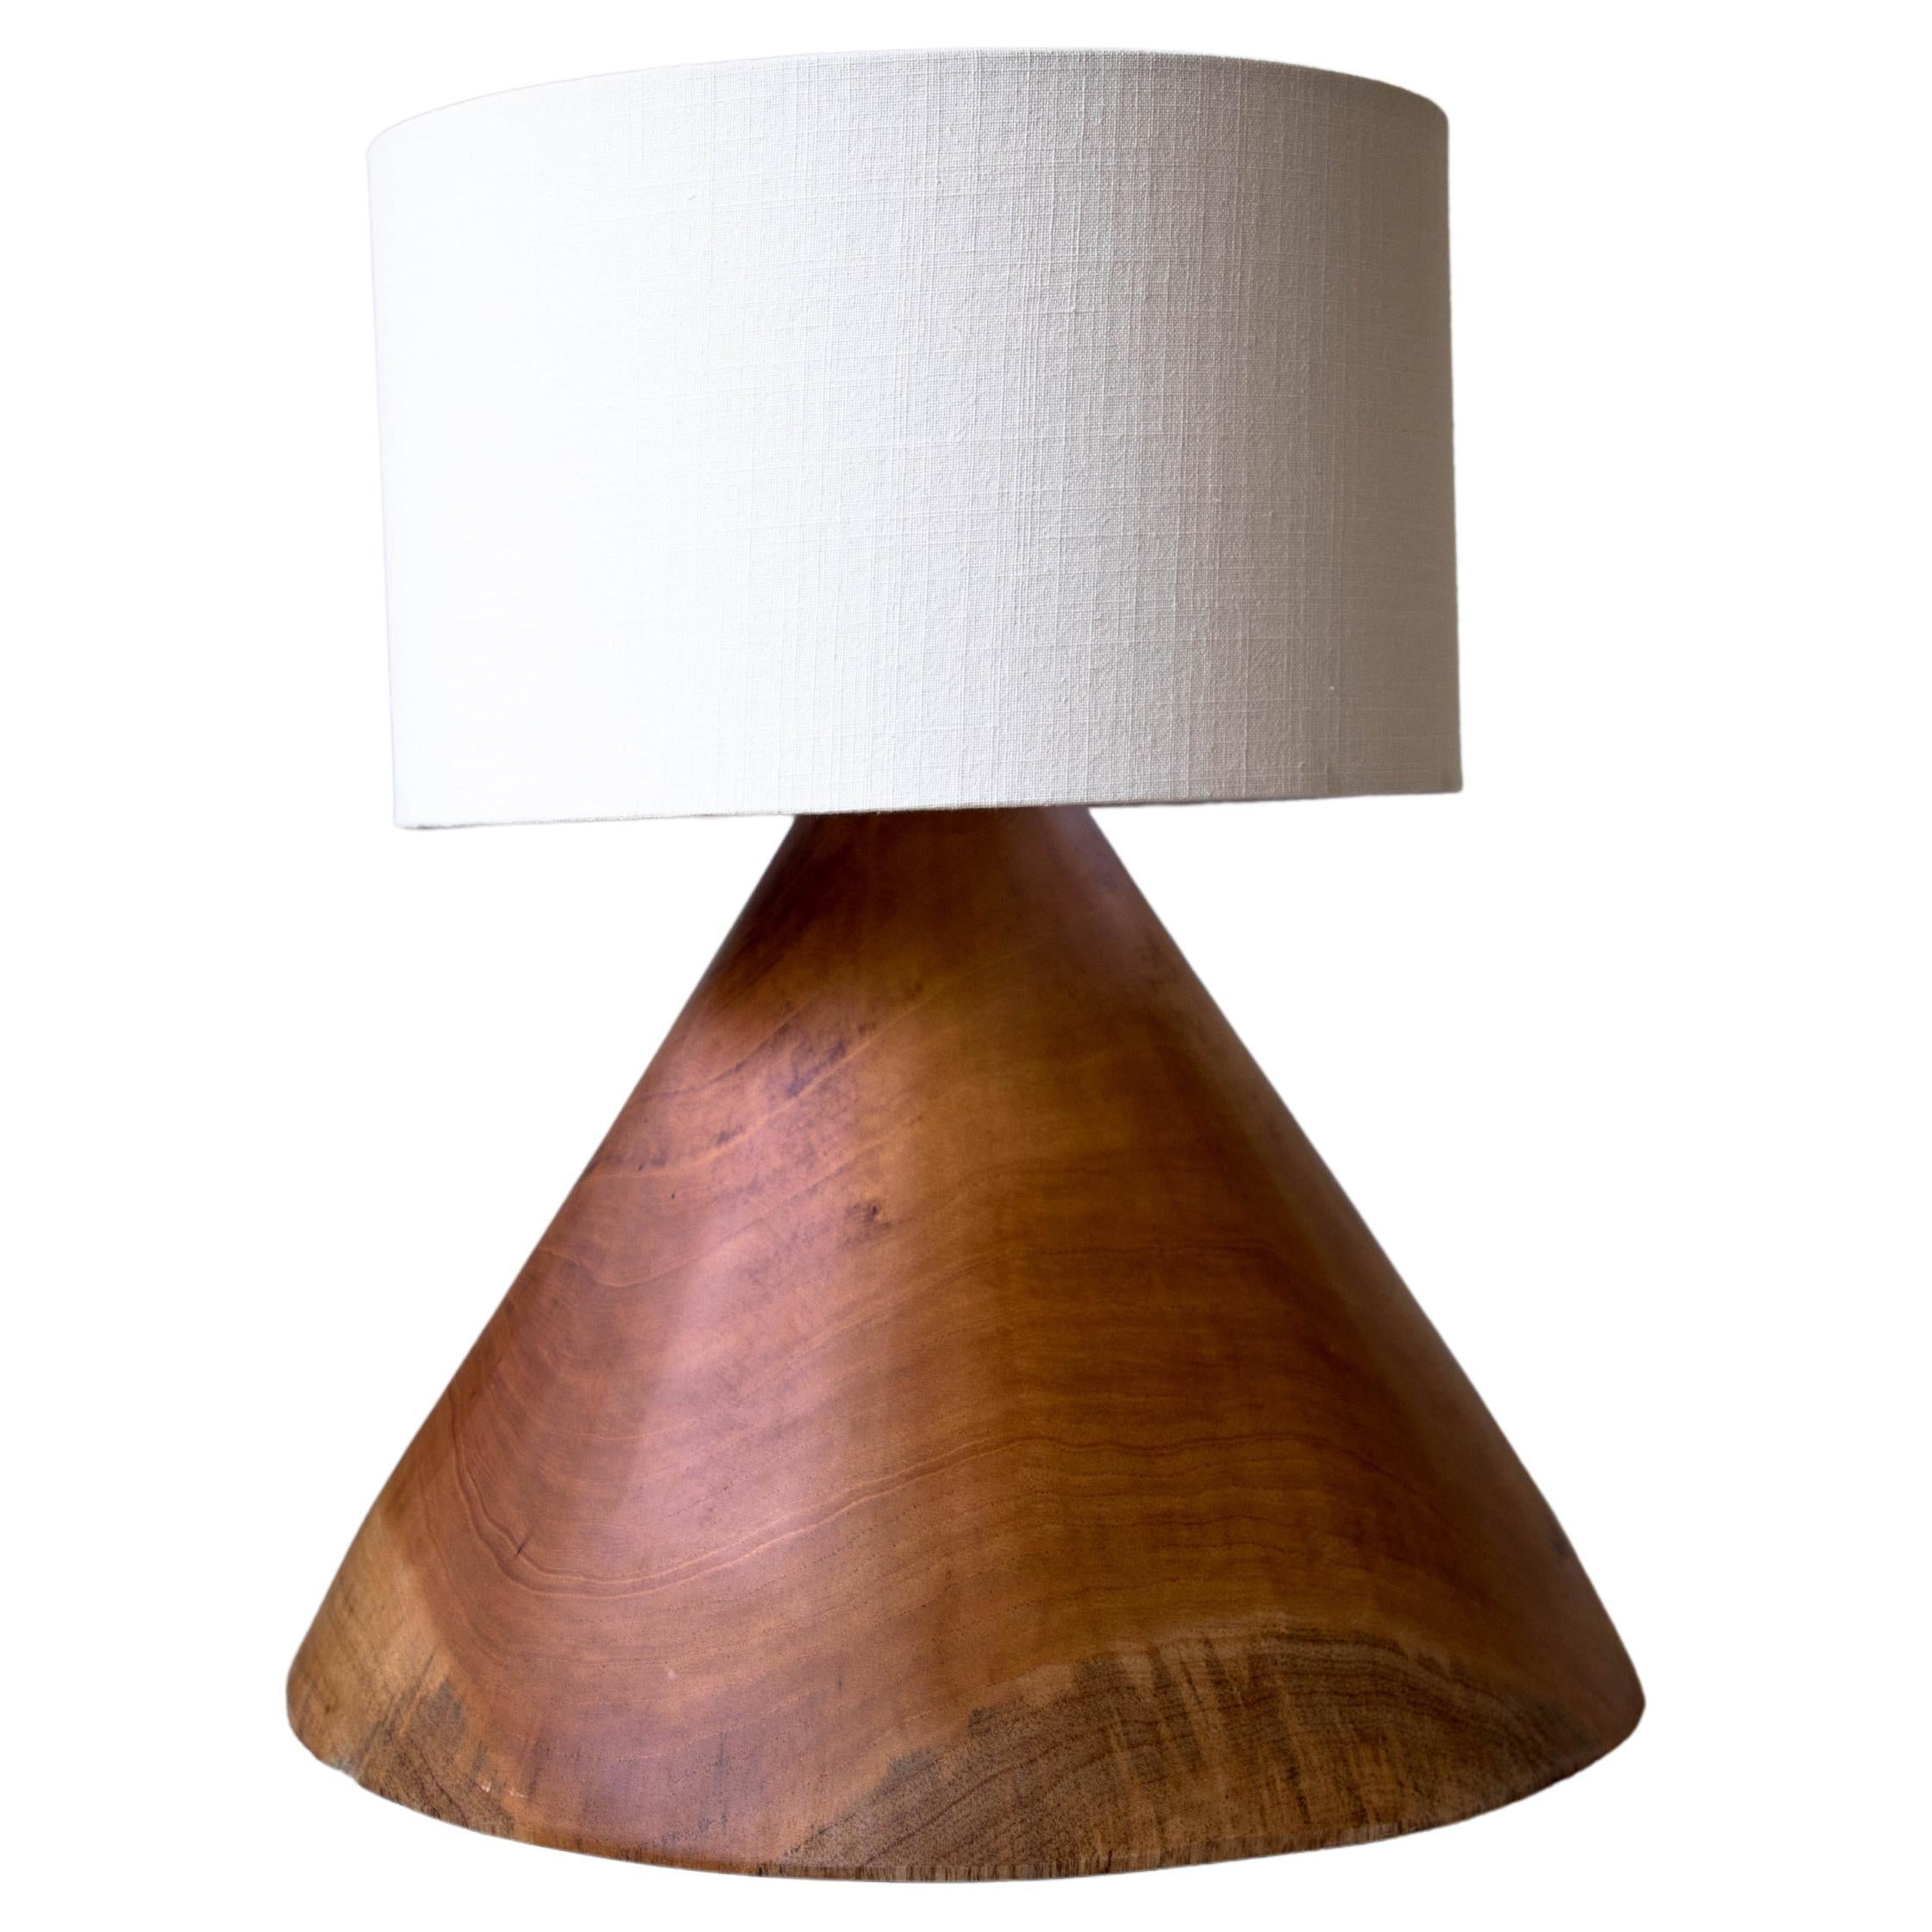 Original 08 Cone Table Lamp with Linen Screen by Daniel Orozco For Sale